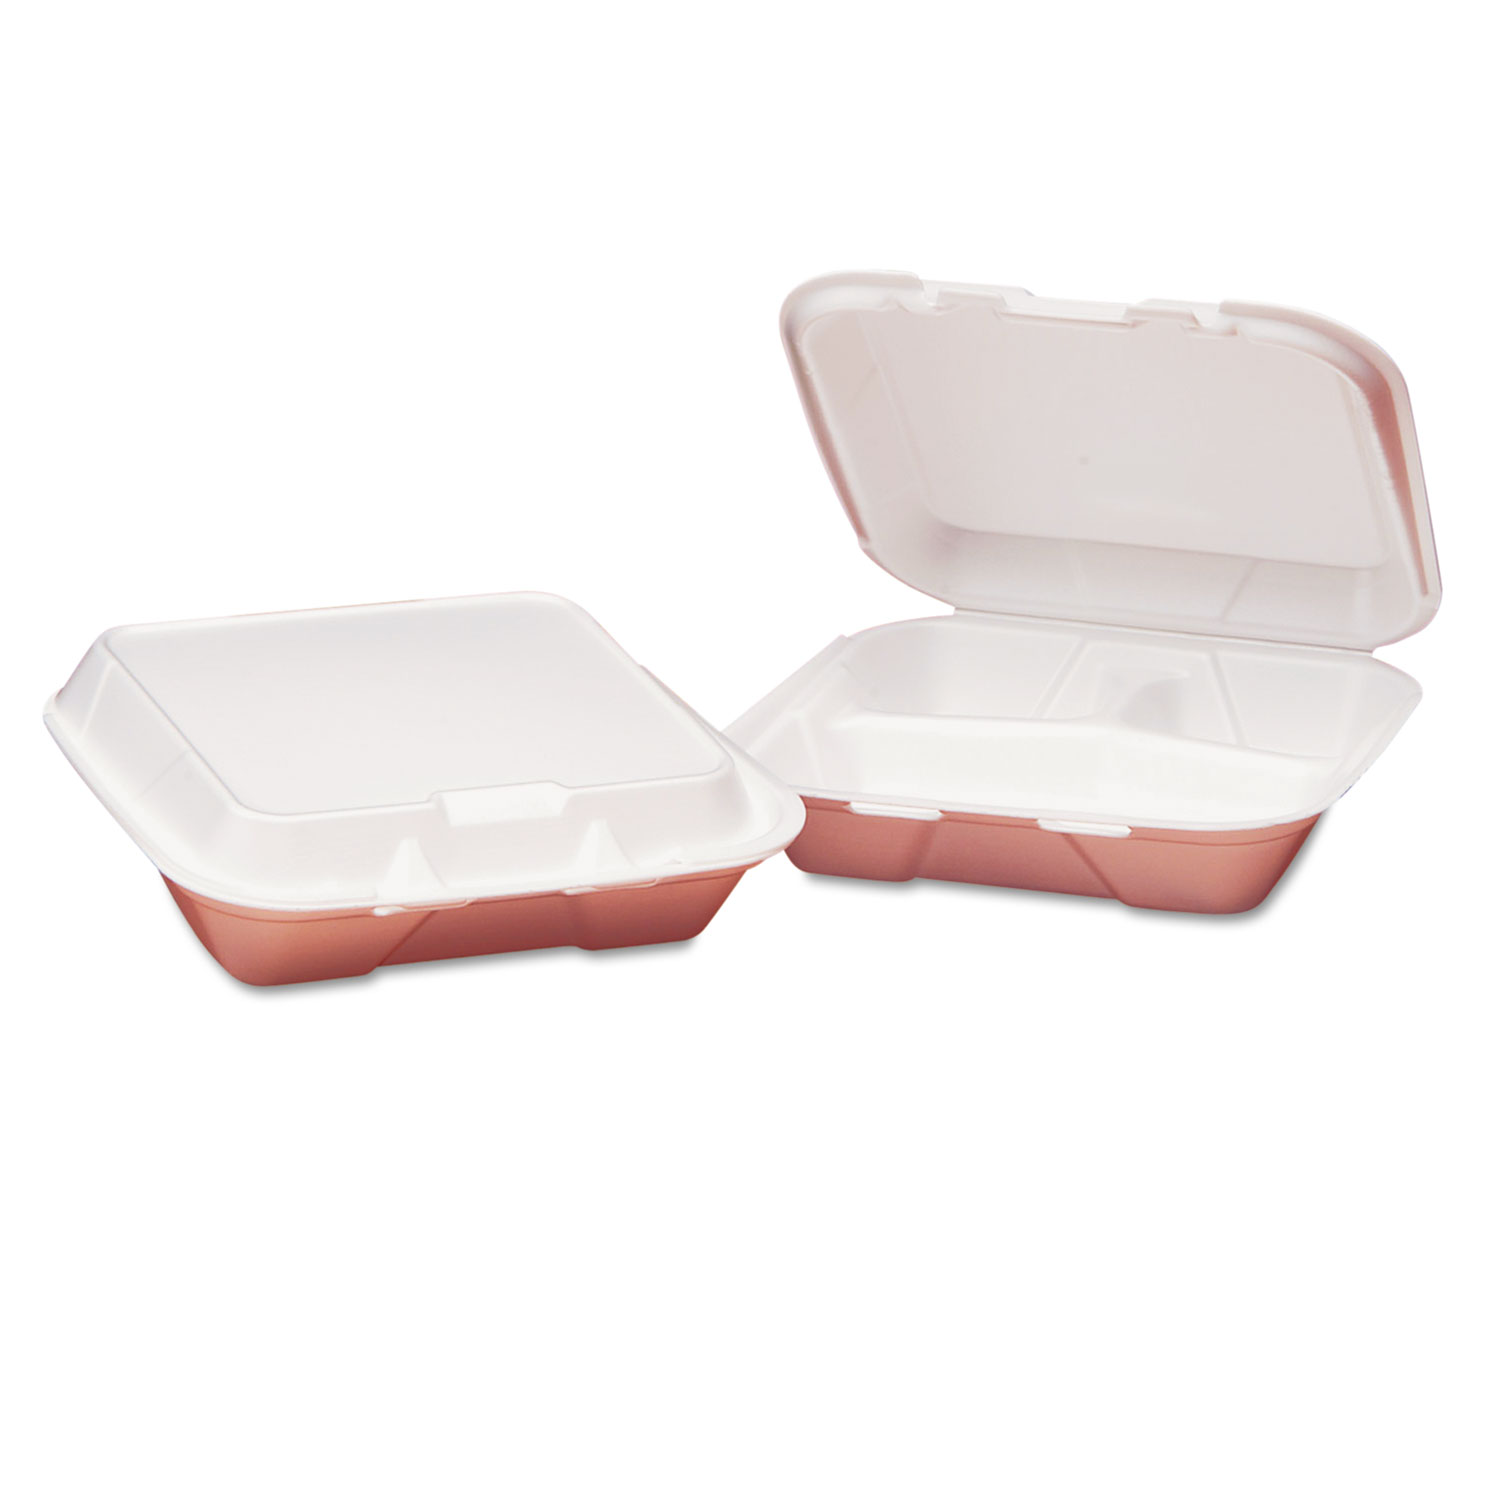  Genpak SN223--- Foam Hinged Carryout Container, 3-Compartment, 8-4/9x7-5/8x2-3/8, White, 100/Bag (GNPSN223) 